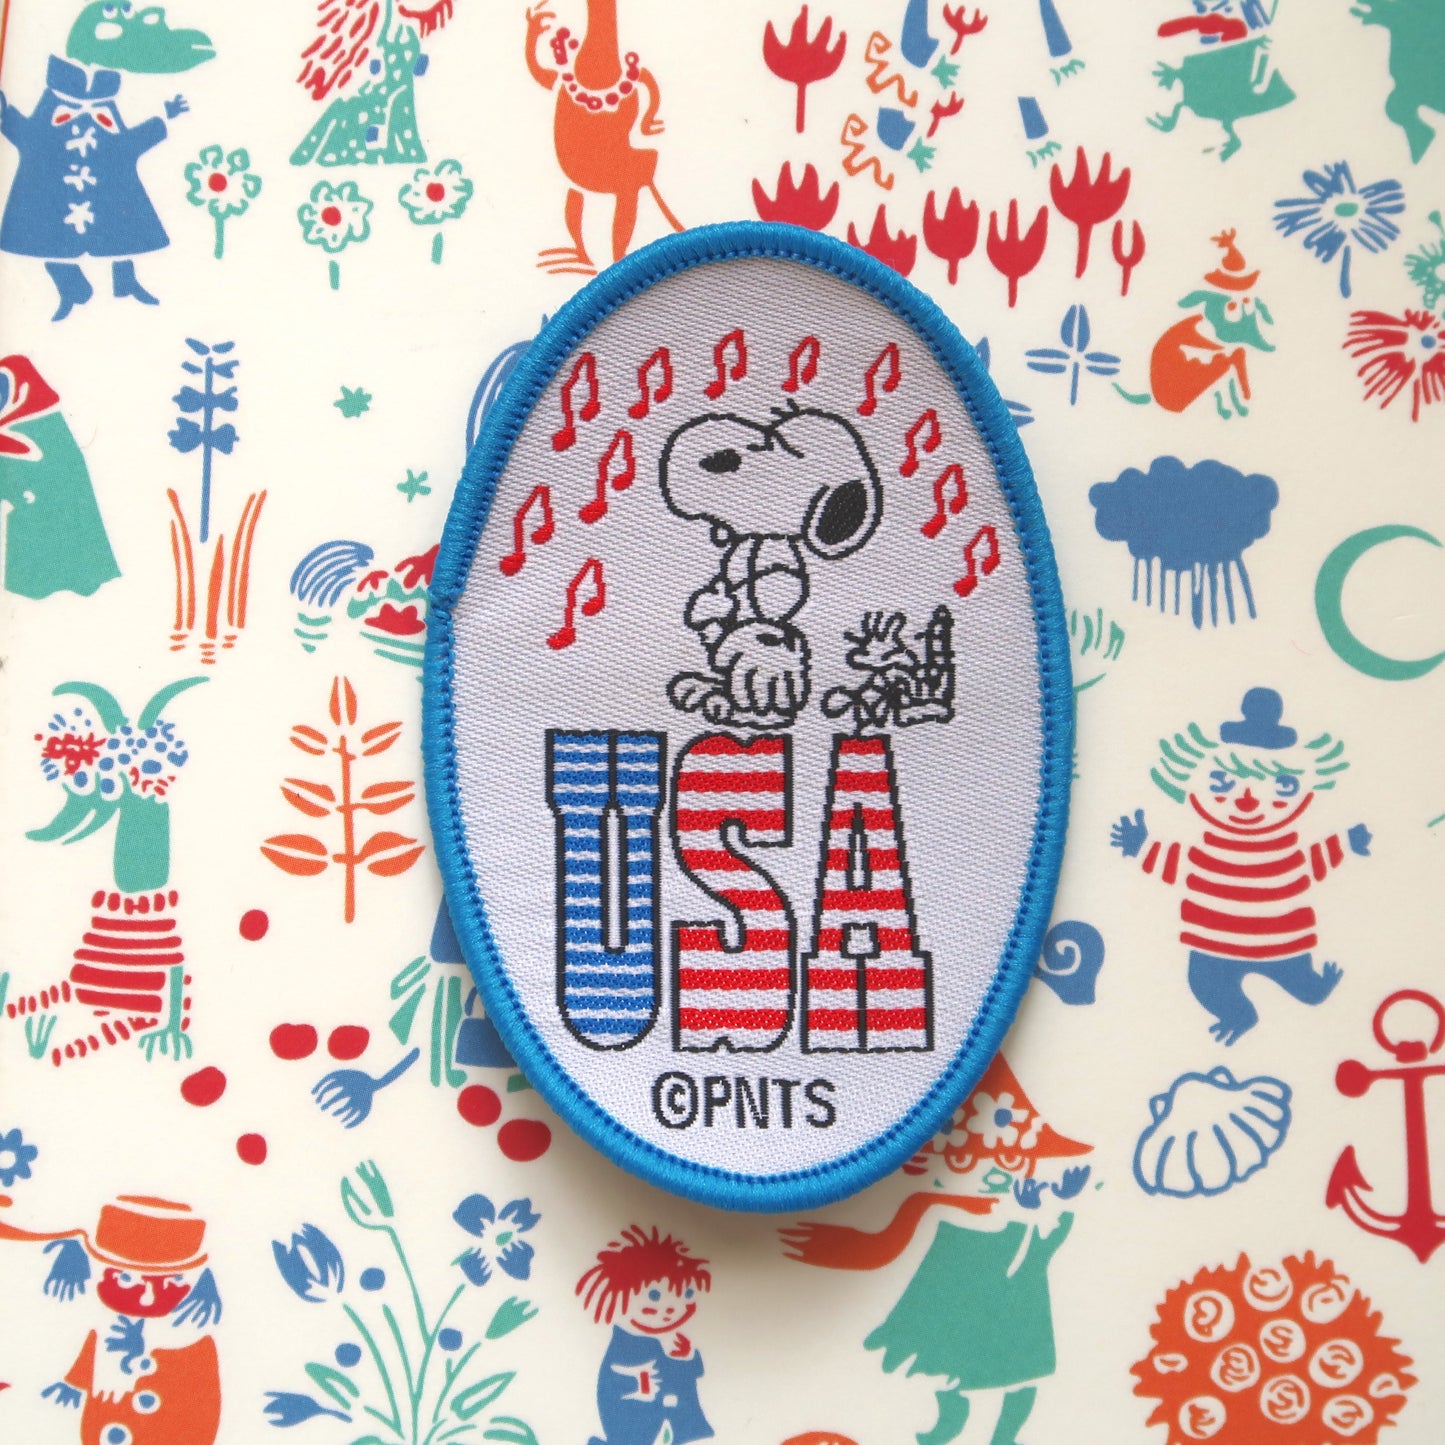 Snoopy Embroidery Patch // Snoopy from the Peanuts comic "USA" embroidered patch badge appliqué